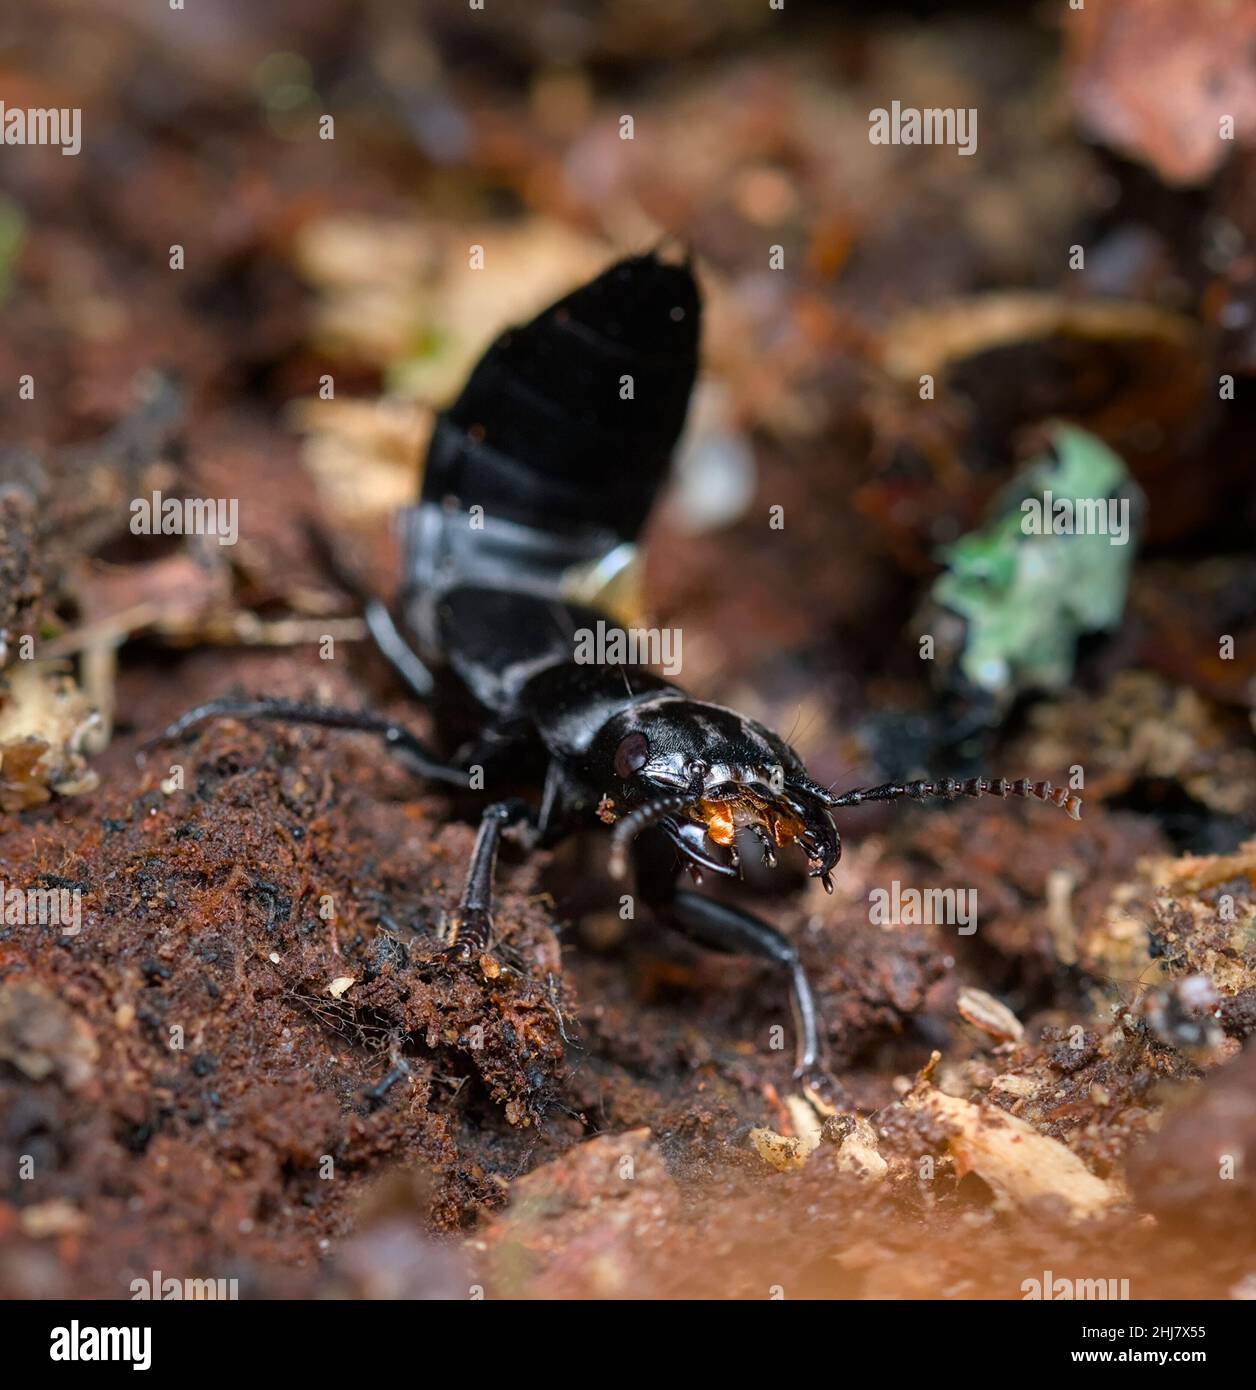 Devils Coach Horse Beetle, Staphylinus olens, Crawling Through The Leaf Litter With Tail Raised, New Forest UK Stock Photo